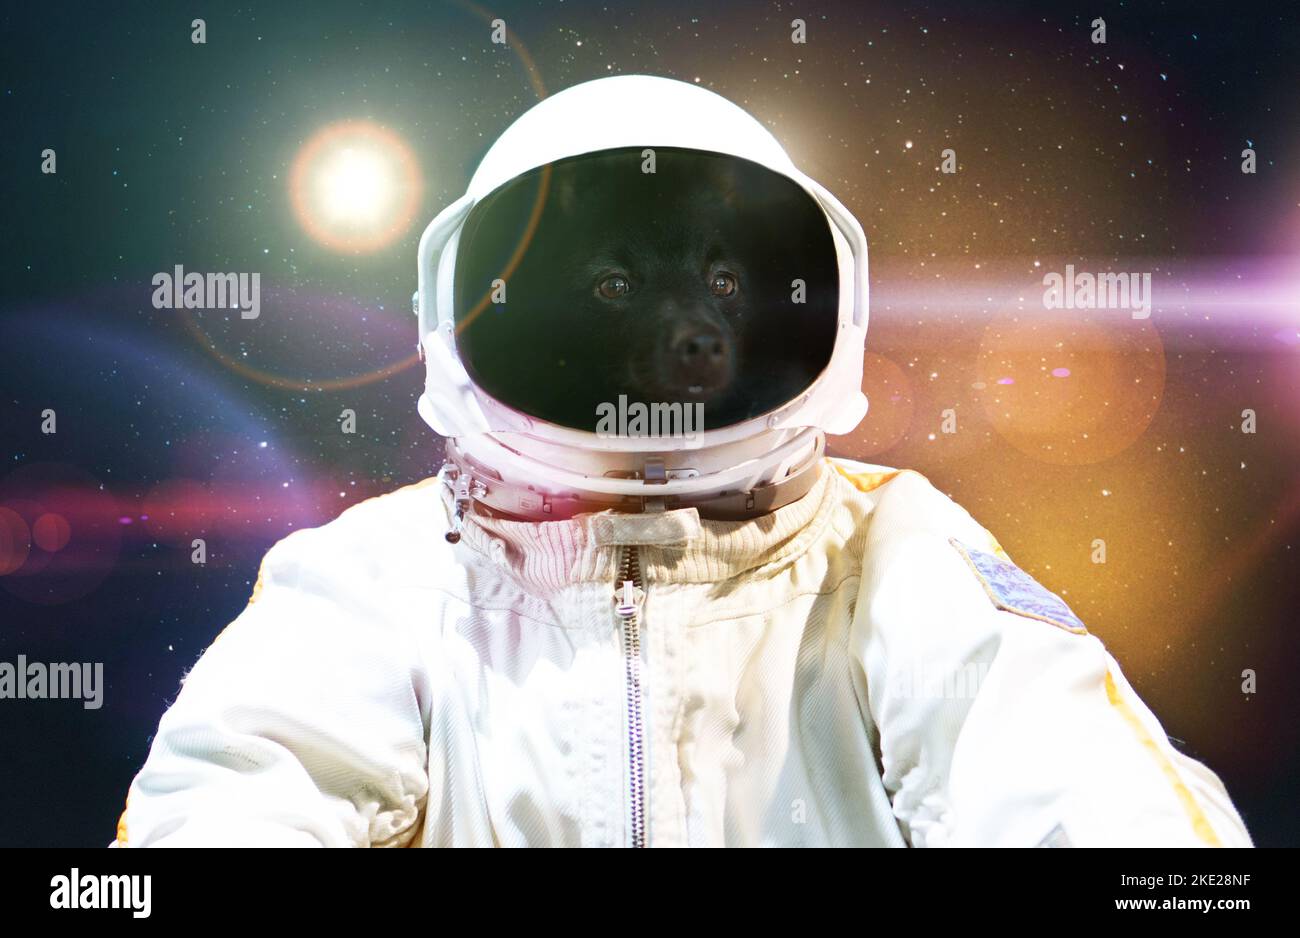 Dog in an astronauts spacesuit in outer space. Stock Photo